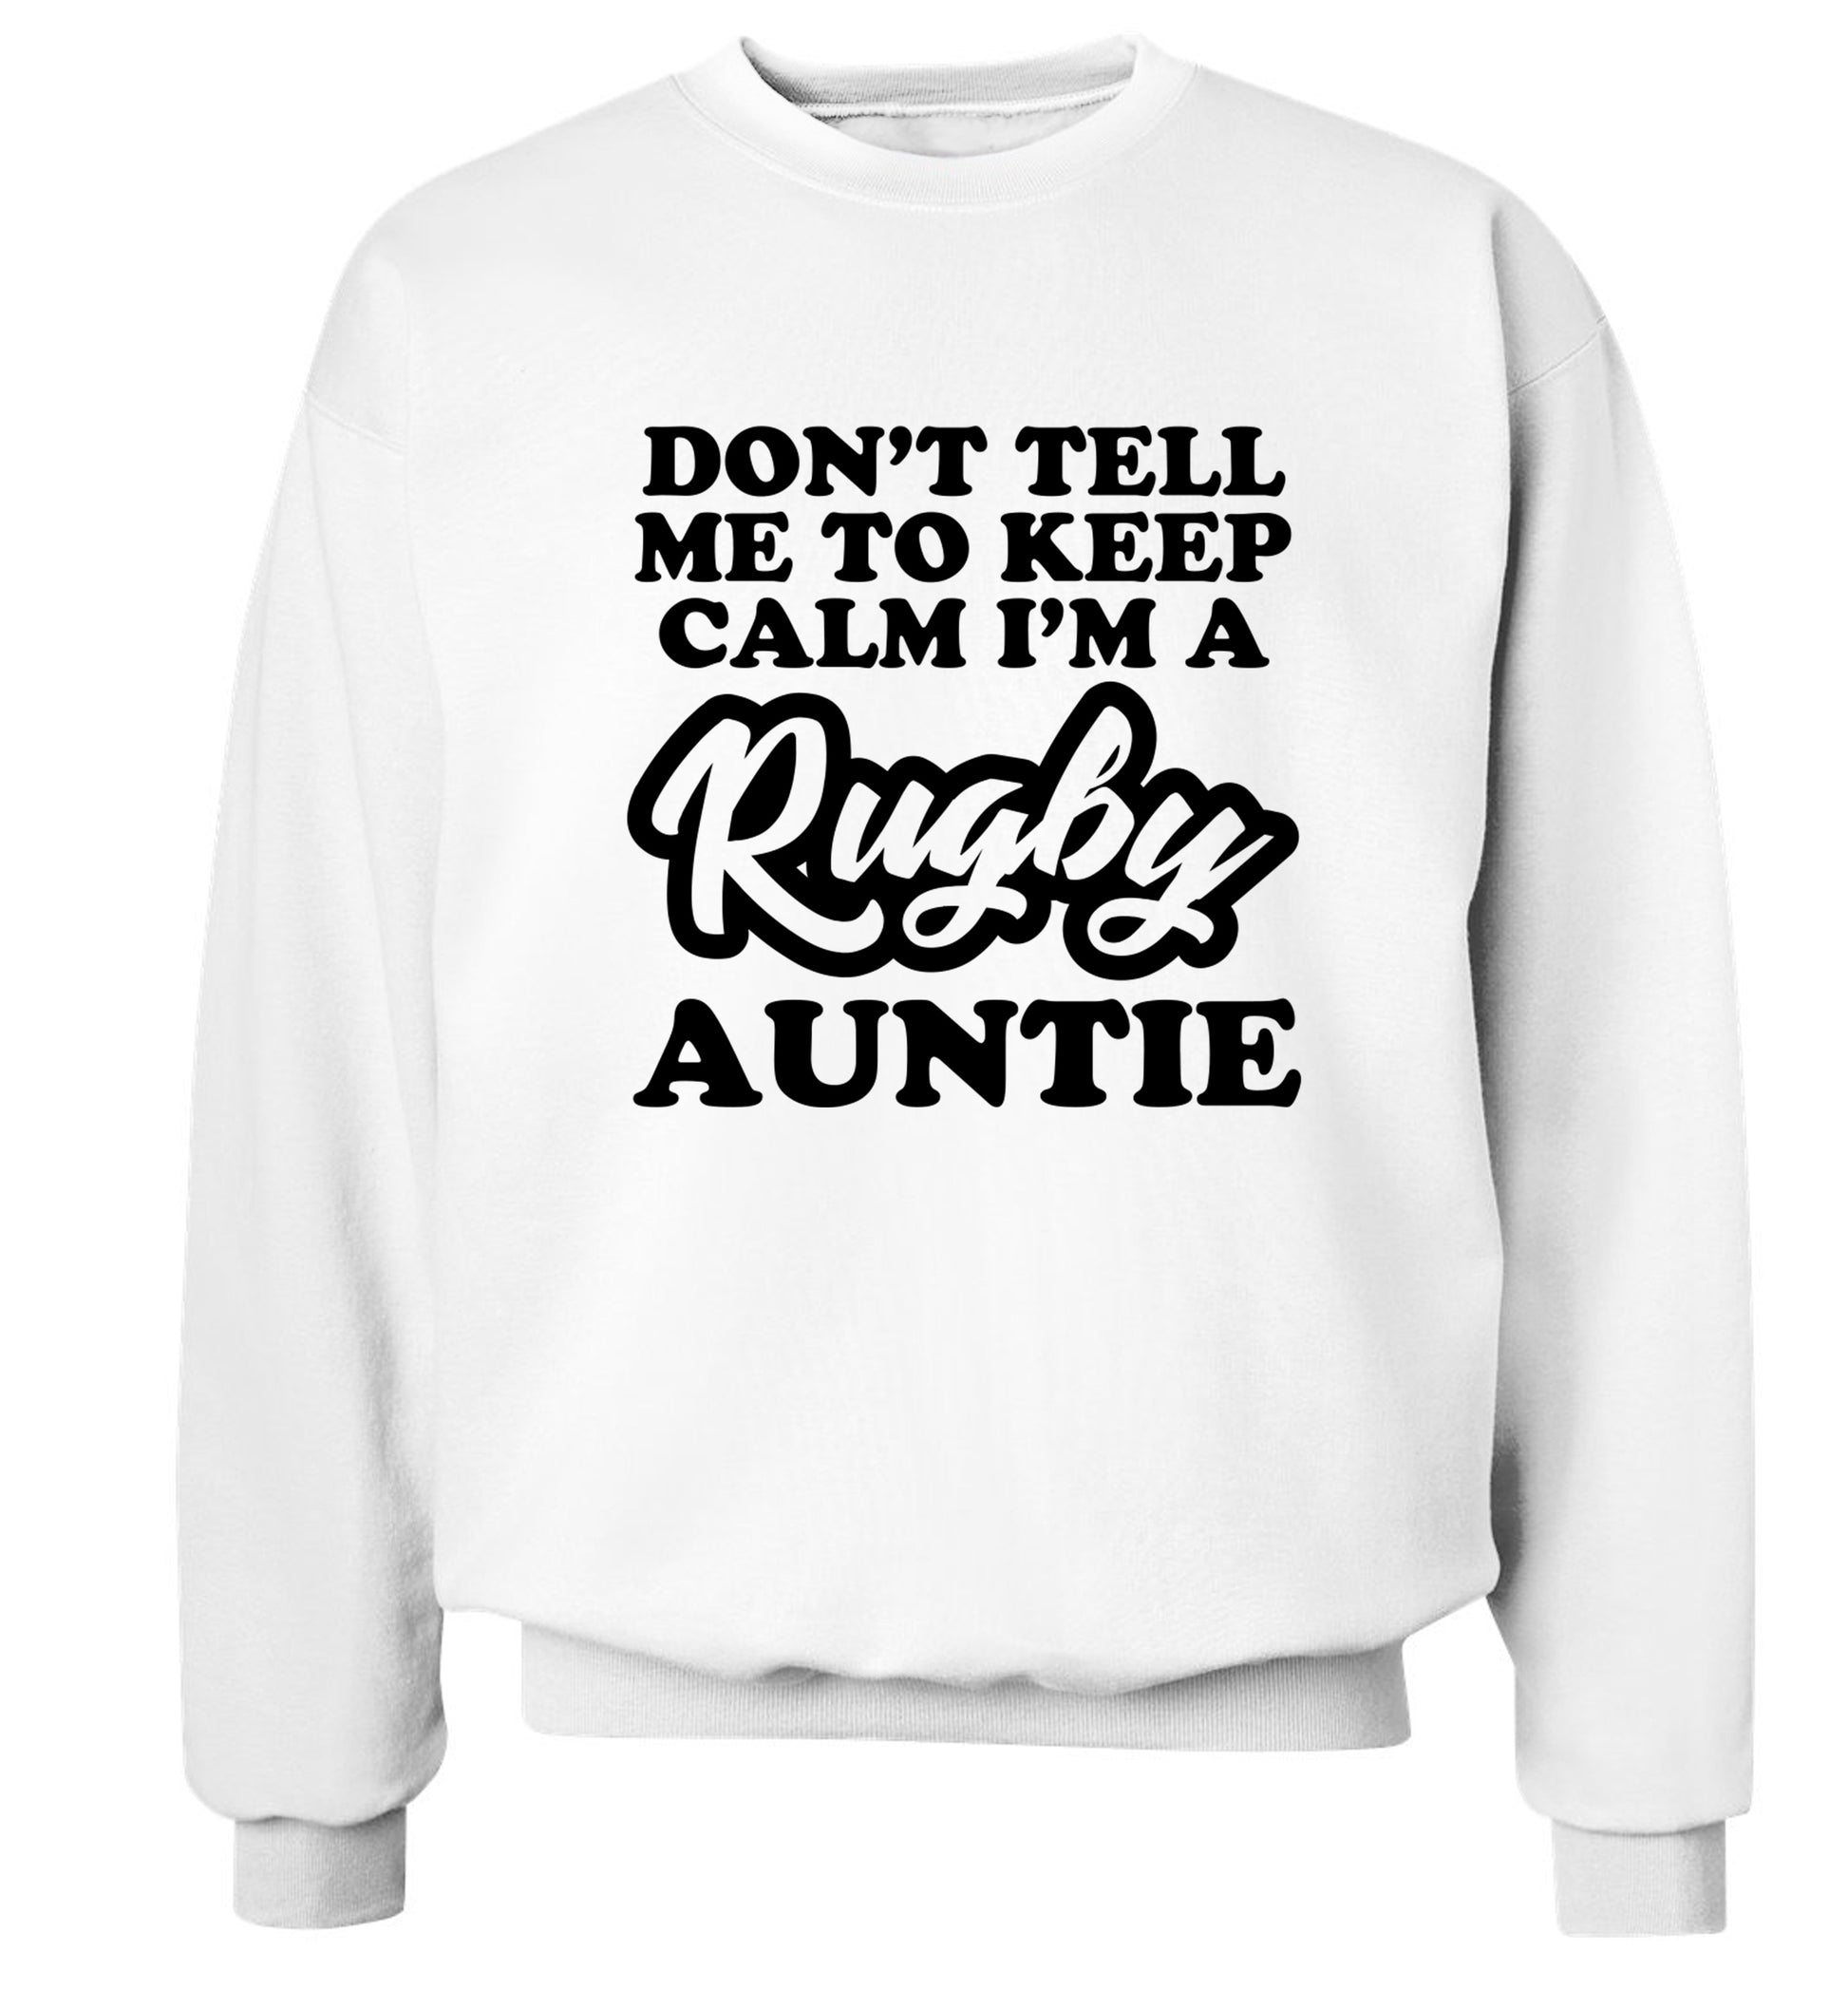 Don't tell me keep calm I'm a rugby auntie Adult's unisex white Sweater 2XL